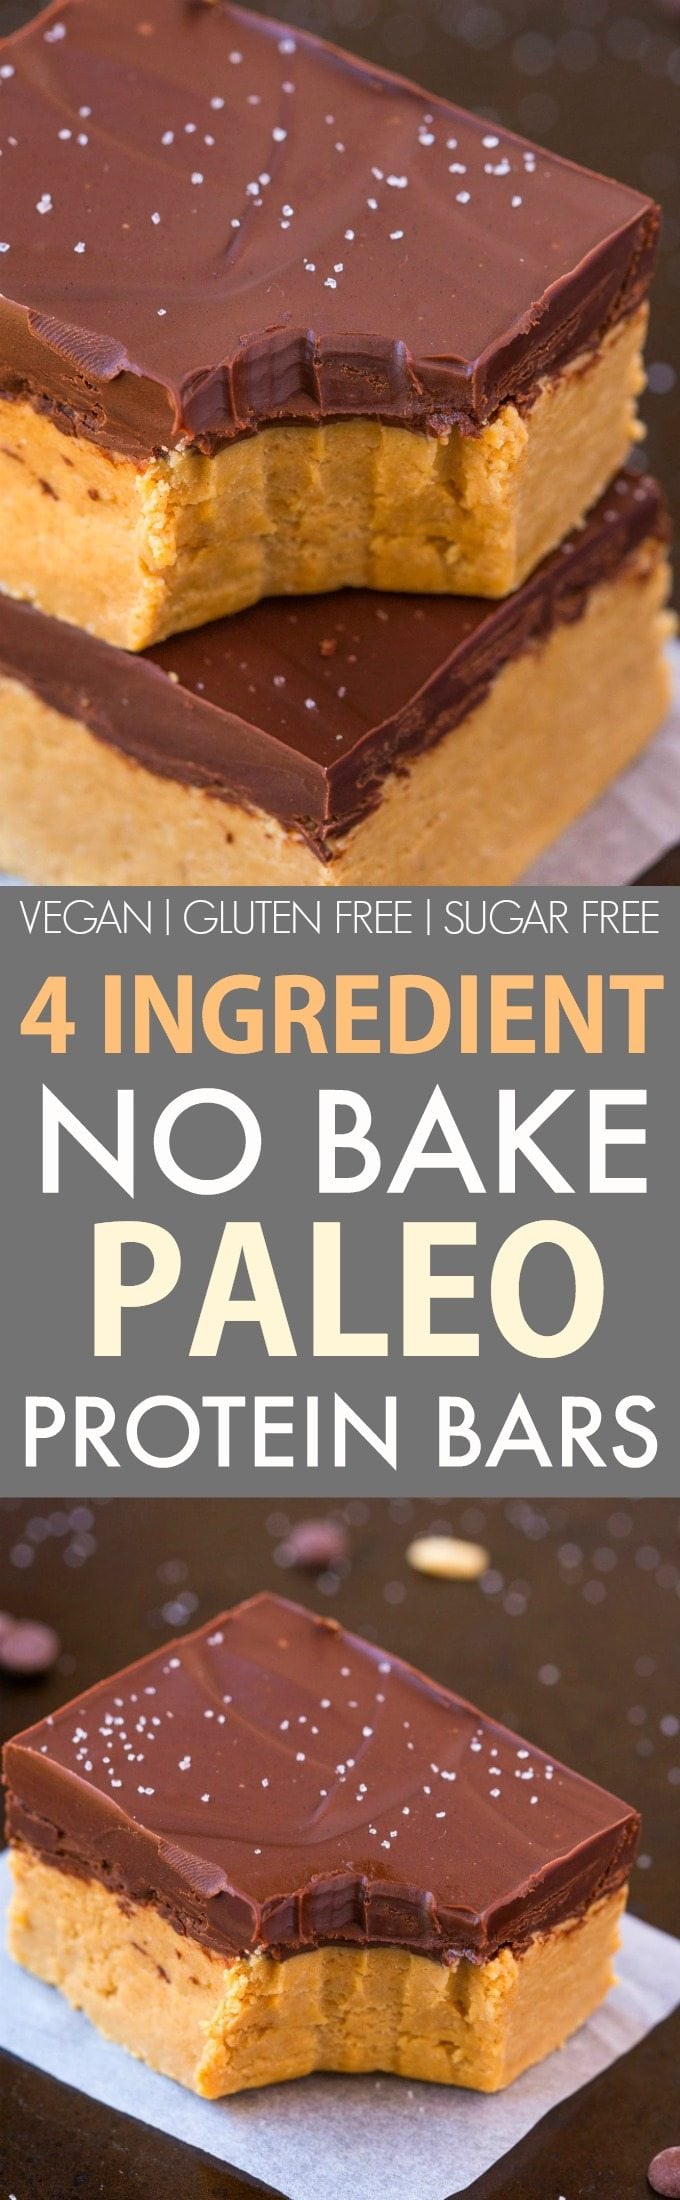 4-Ingredient No Bake Paleo Protein Bars (V, GF, DF)- Thick, chewy and fudgy protein bars which are better than anything store bought! Ready in 5 minutes and the perfect low carb and sugar free snack! {vegan, gluten free, dairy free recipe}- thebigmansworld.com